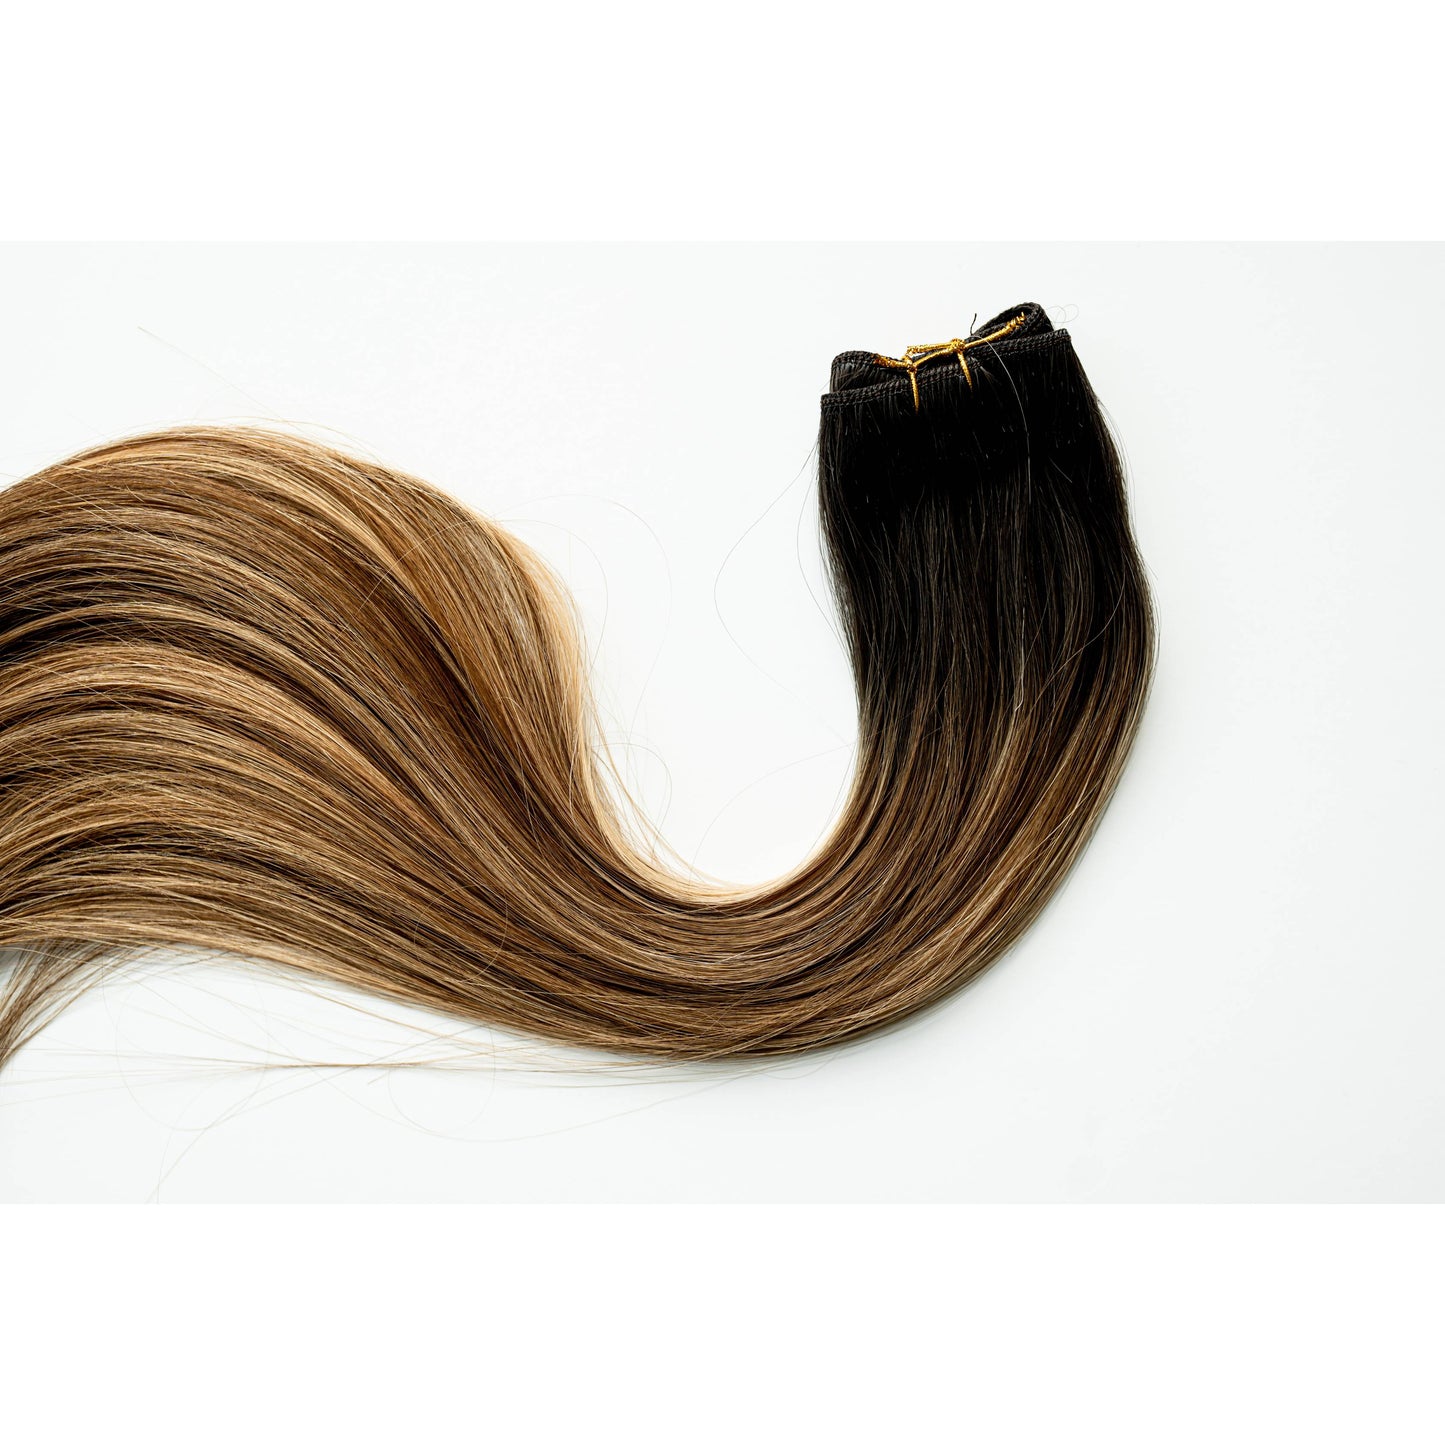 Lilly | Strong Strands Machine Weft Extensions